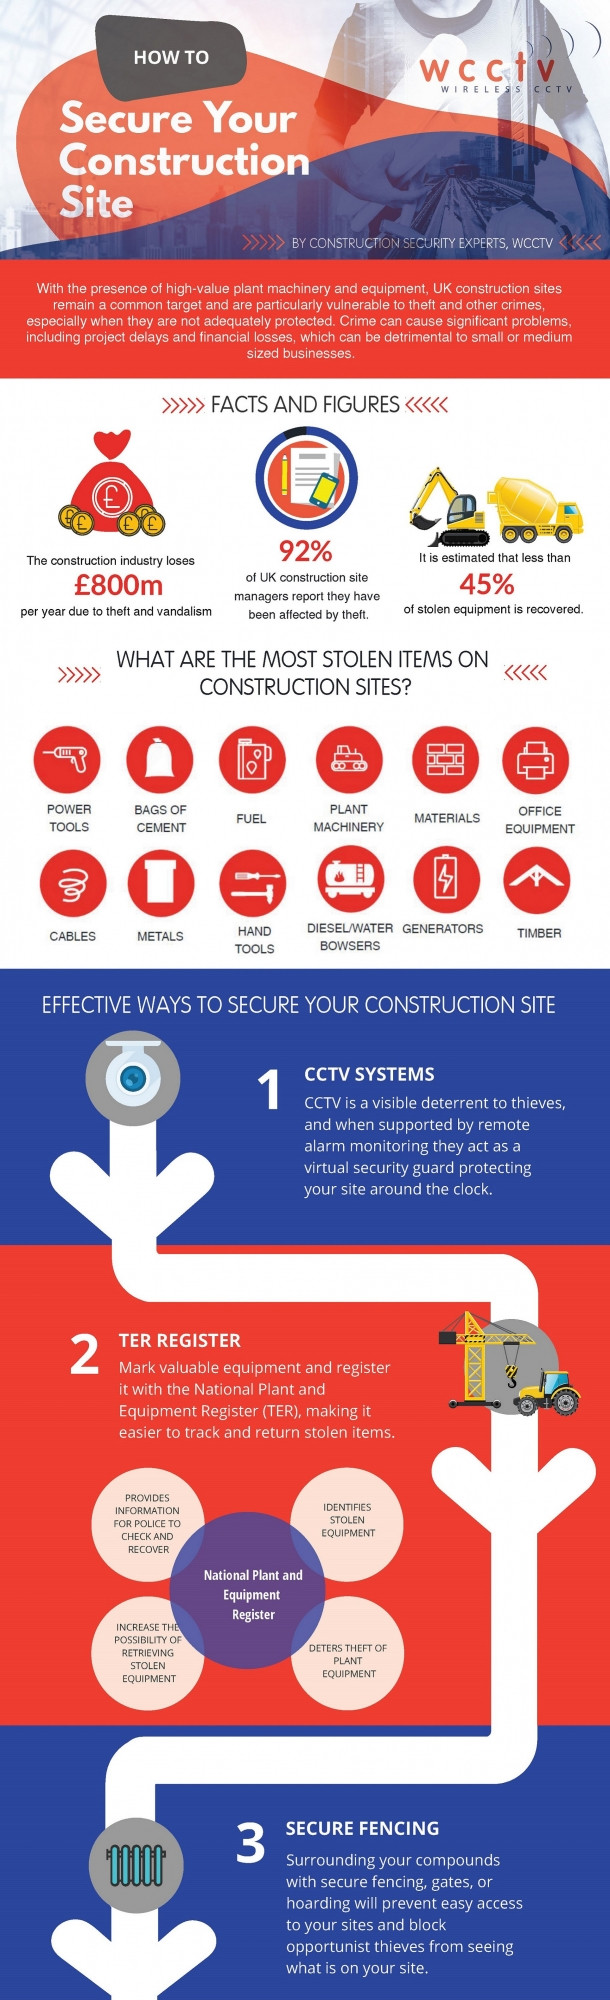 How to Secure your Construction Site - Infographic